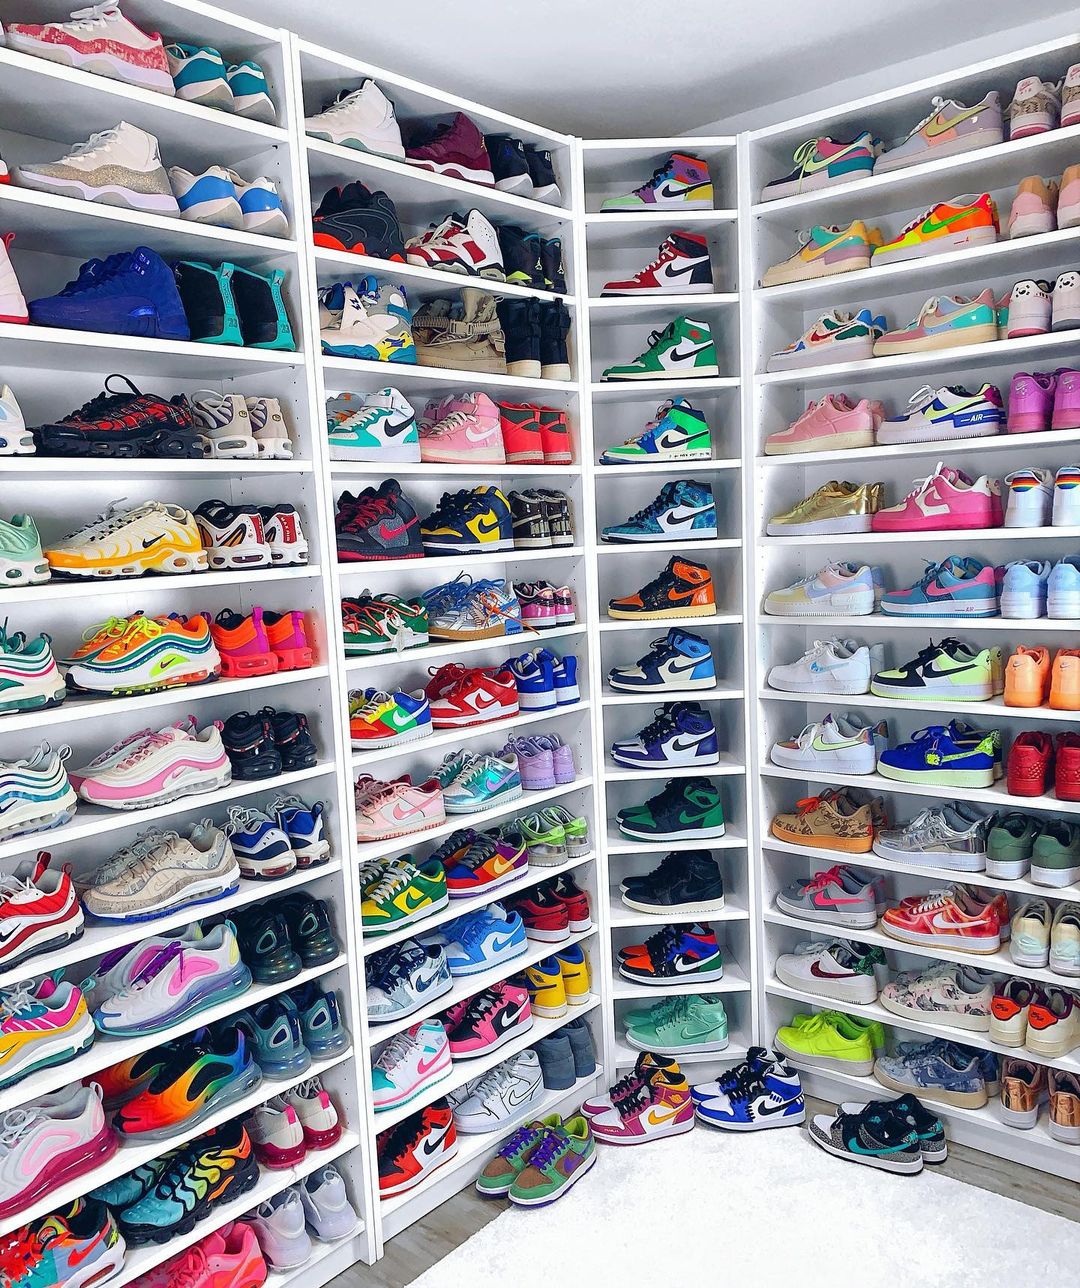 A room converted into shoe storage.